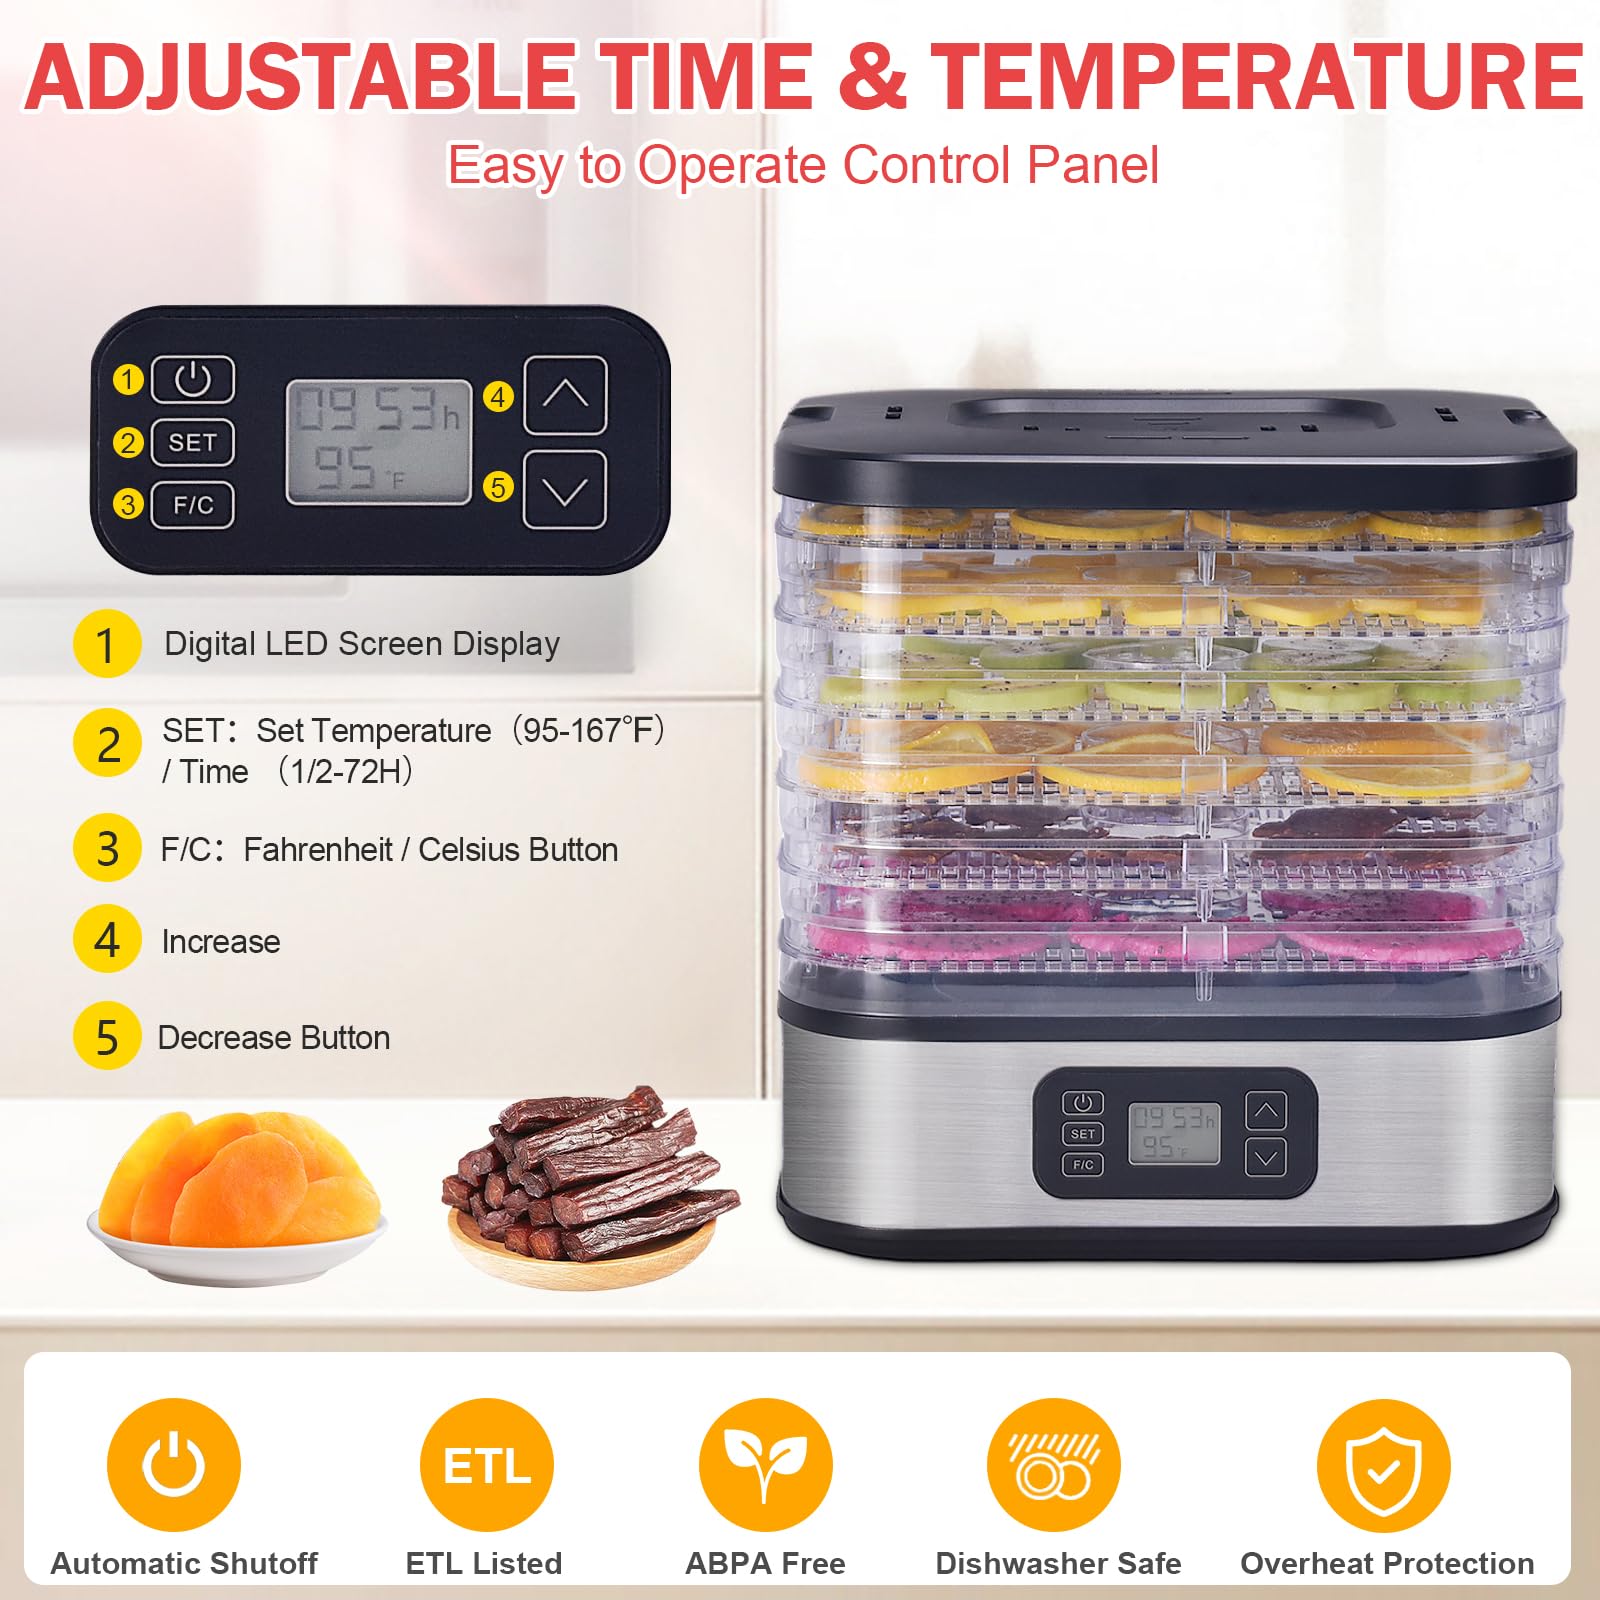 HOPERAN Food Dehydrator, 6 Trays Dehydrator with 72H Timer & 95-167℉ Temperature Control & LED Display, Dehydrators for Food and Jerky, Fruits, Herb, Veggies, Pet Treat, BPA-Free, Recipe Book Included